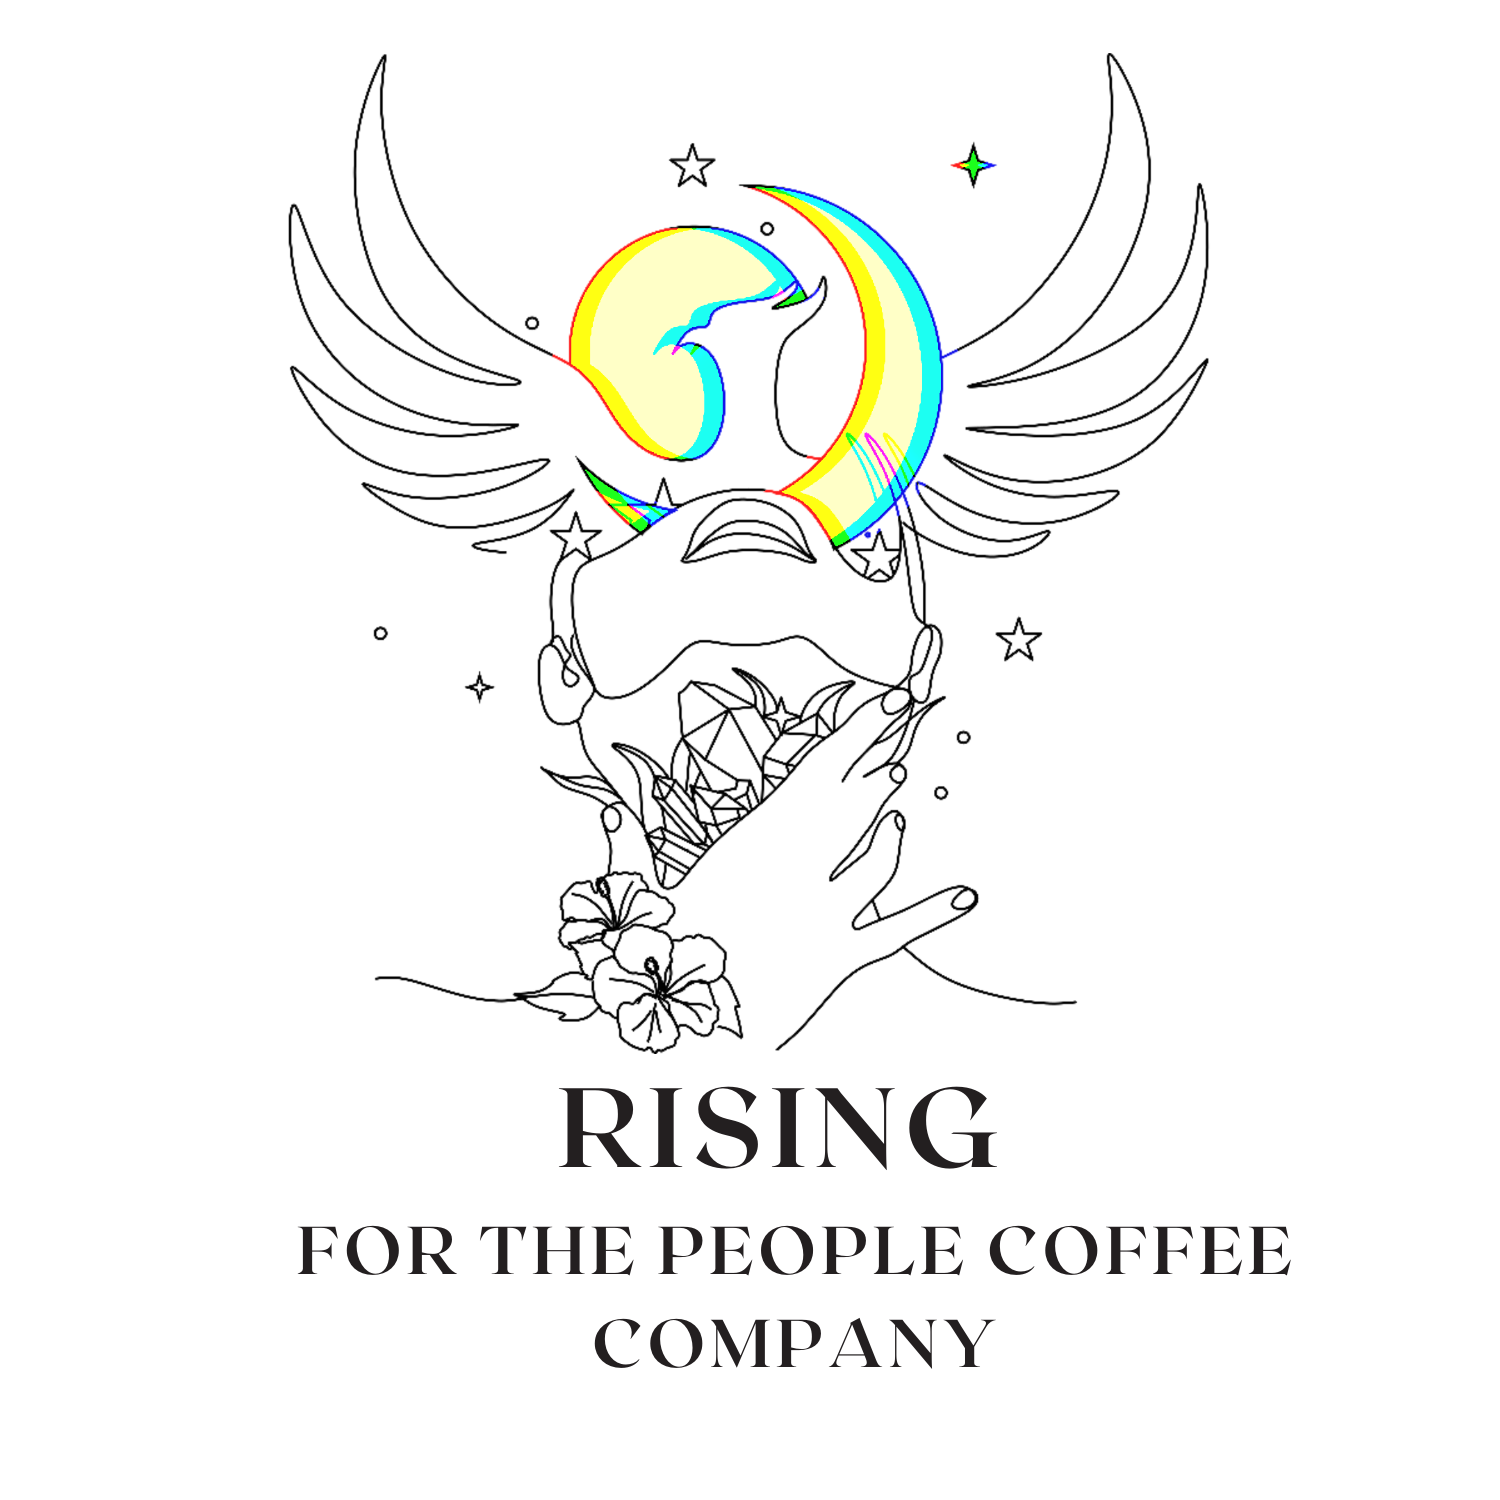 RISING FOR PEOPLE COFFEE